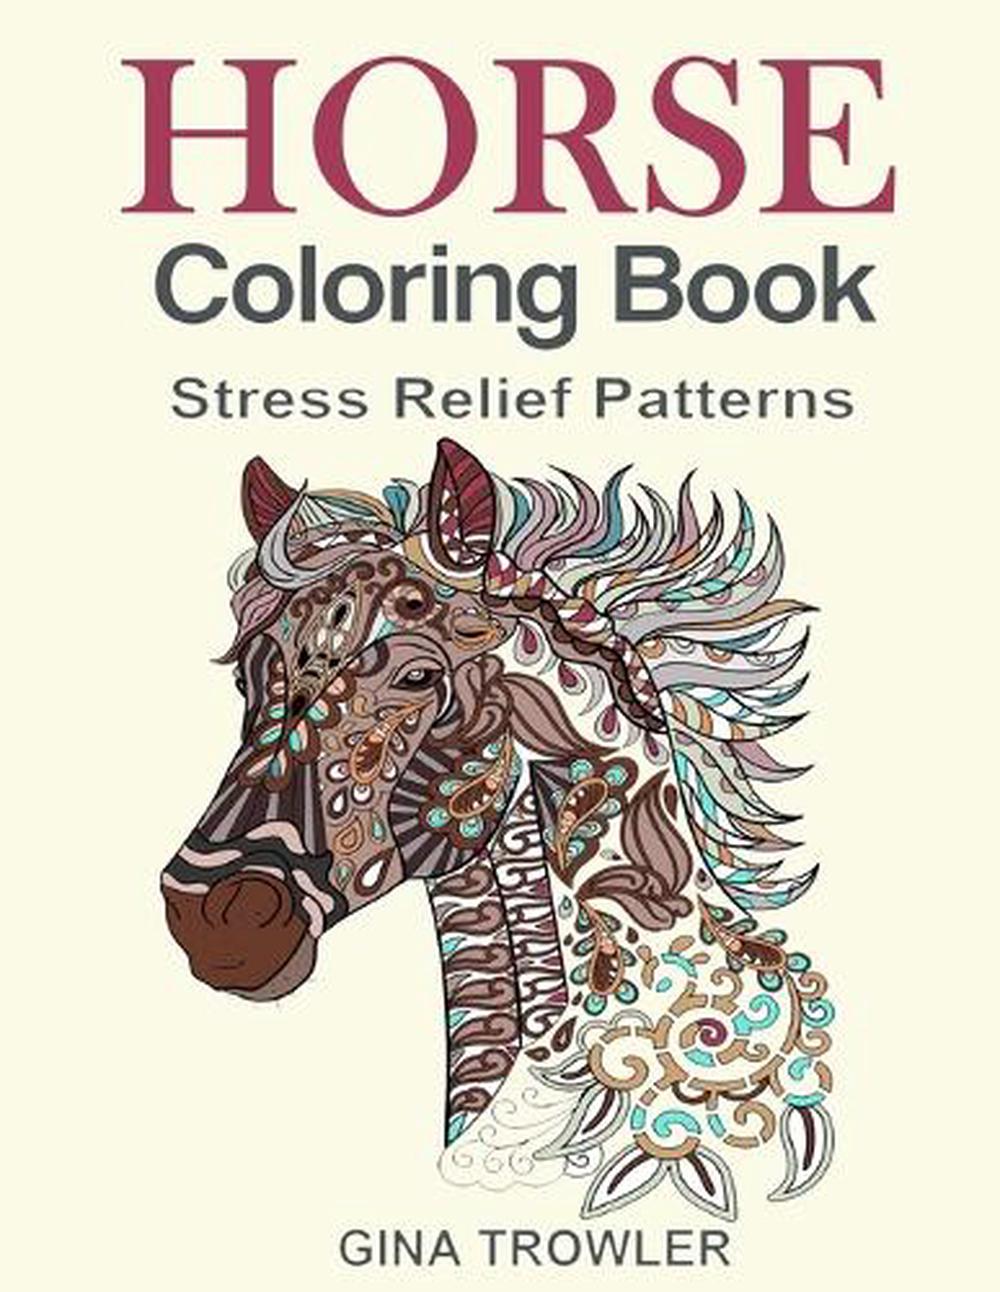 Horse Coloring Book Coloring Stress Relief Patterns For -8541